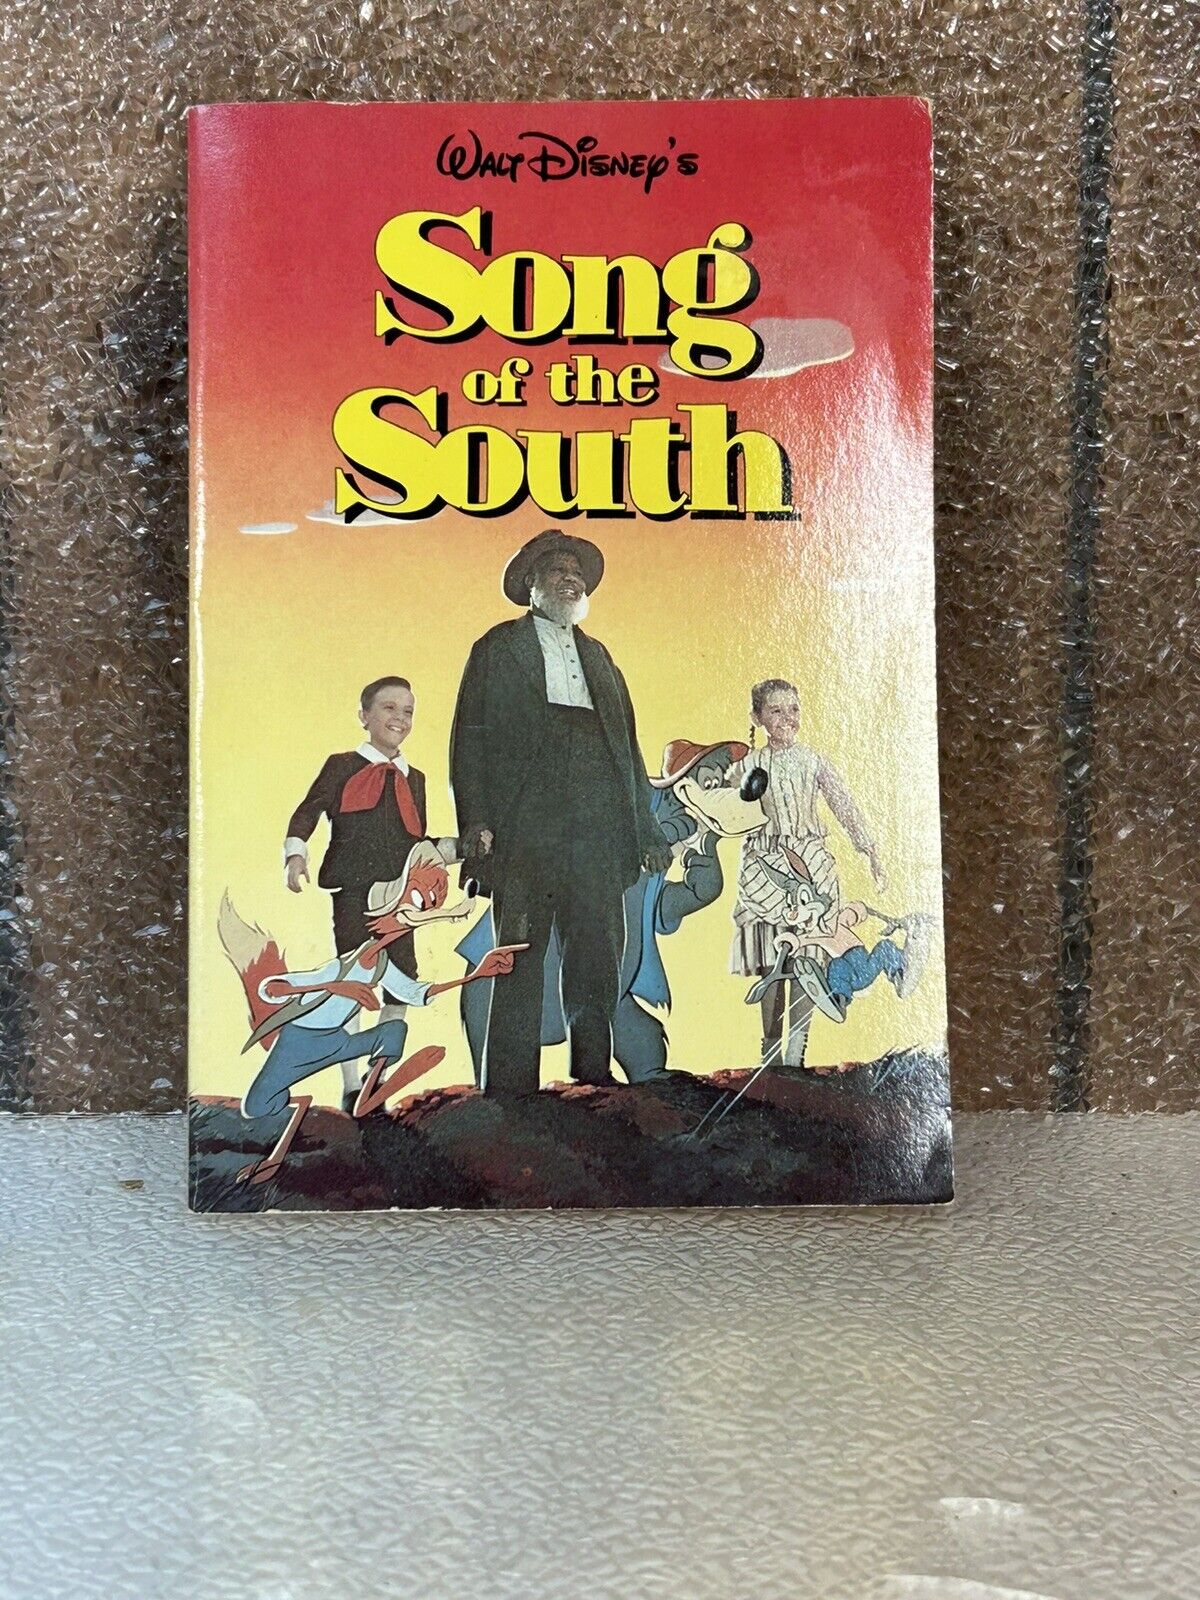 Vintage 1986 Disney's SONG OF THE SOUTH Book